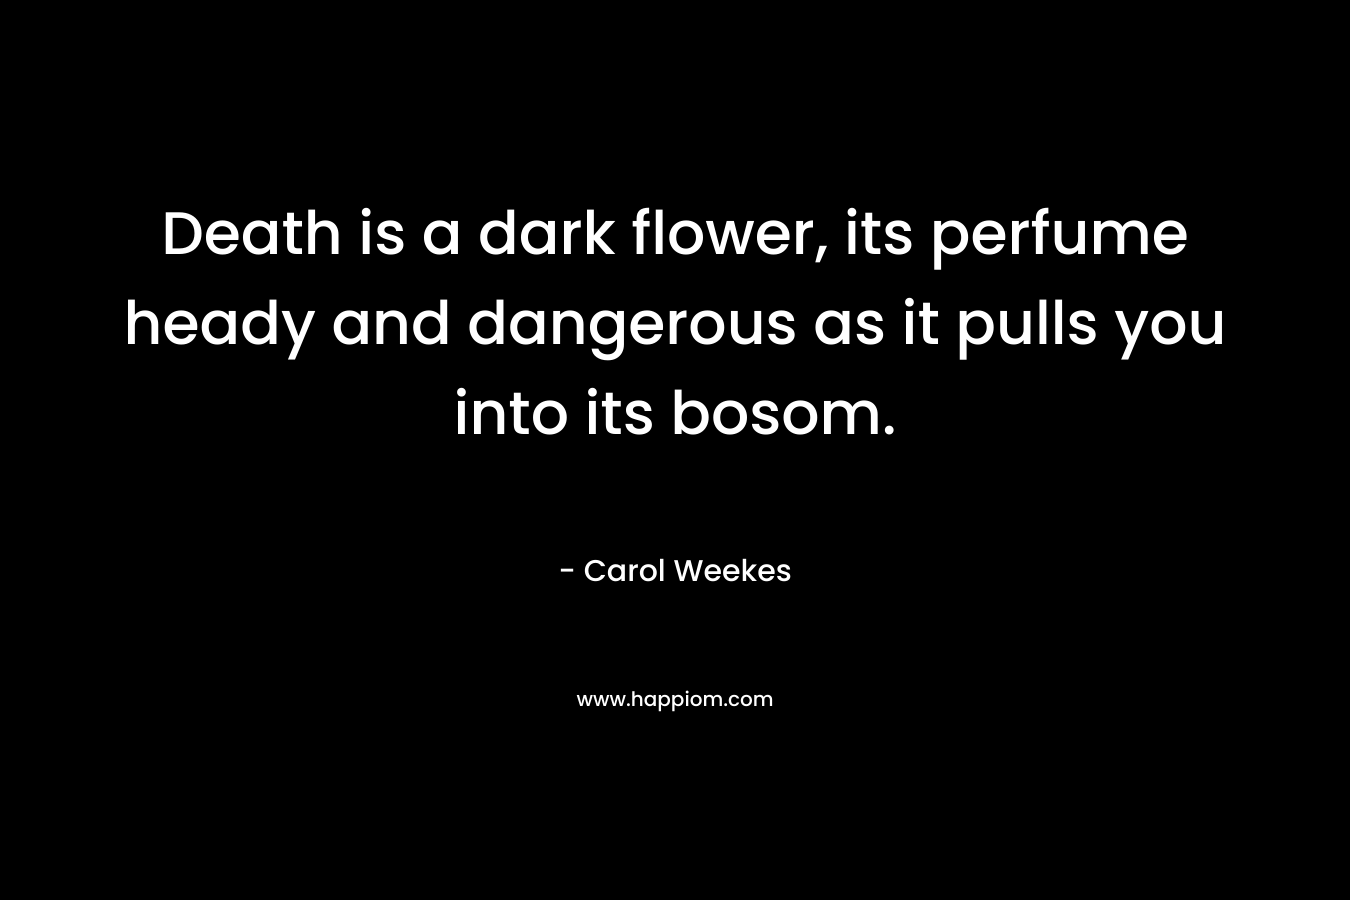 Death is a dark flower, its perfume heady and dangerous as it pulls you into its bosom.